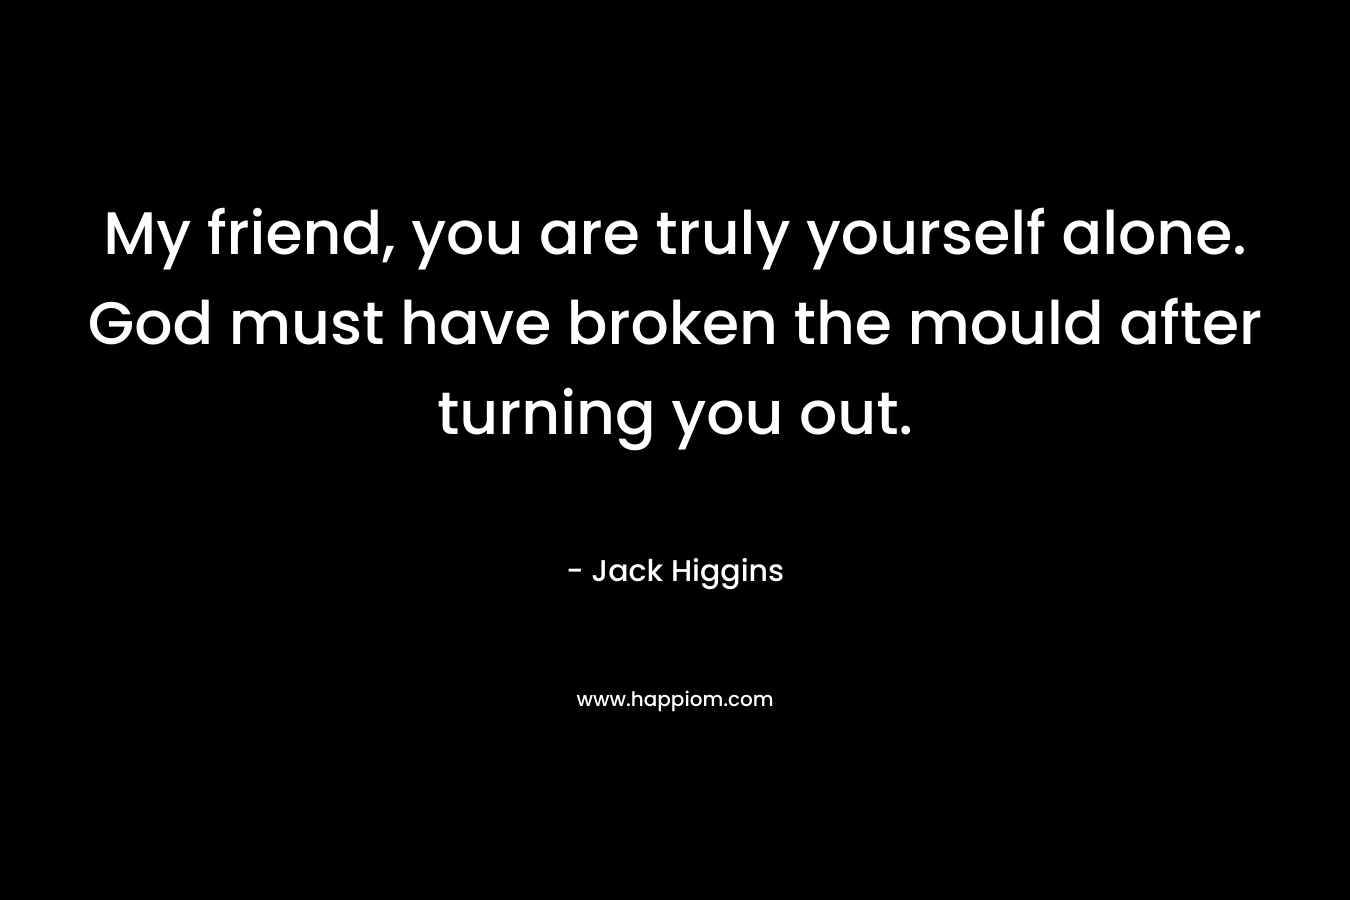 My friend, you are truly yourself alone. God must have broken the mould after turning you out. – Jack Higgins